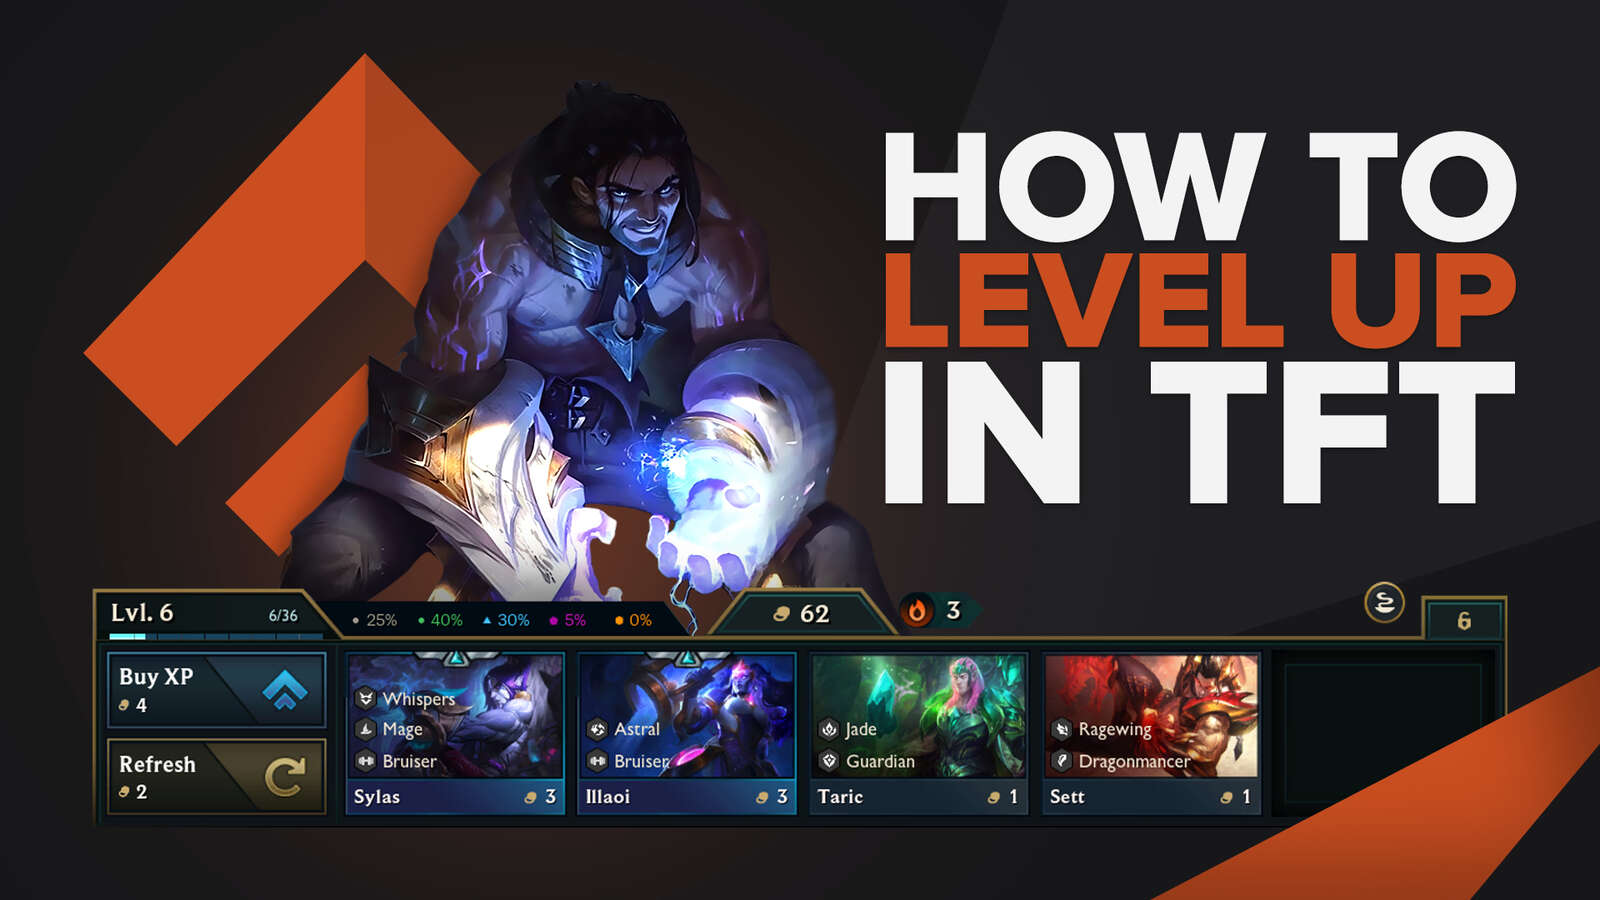 How To Level Up In TFT | The Complete Guide